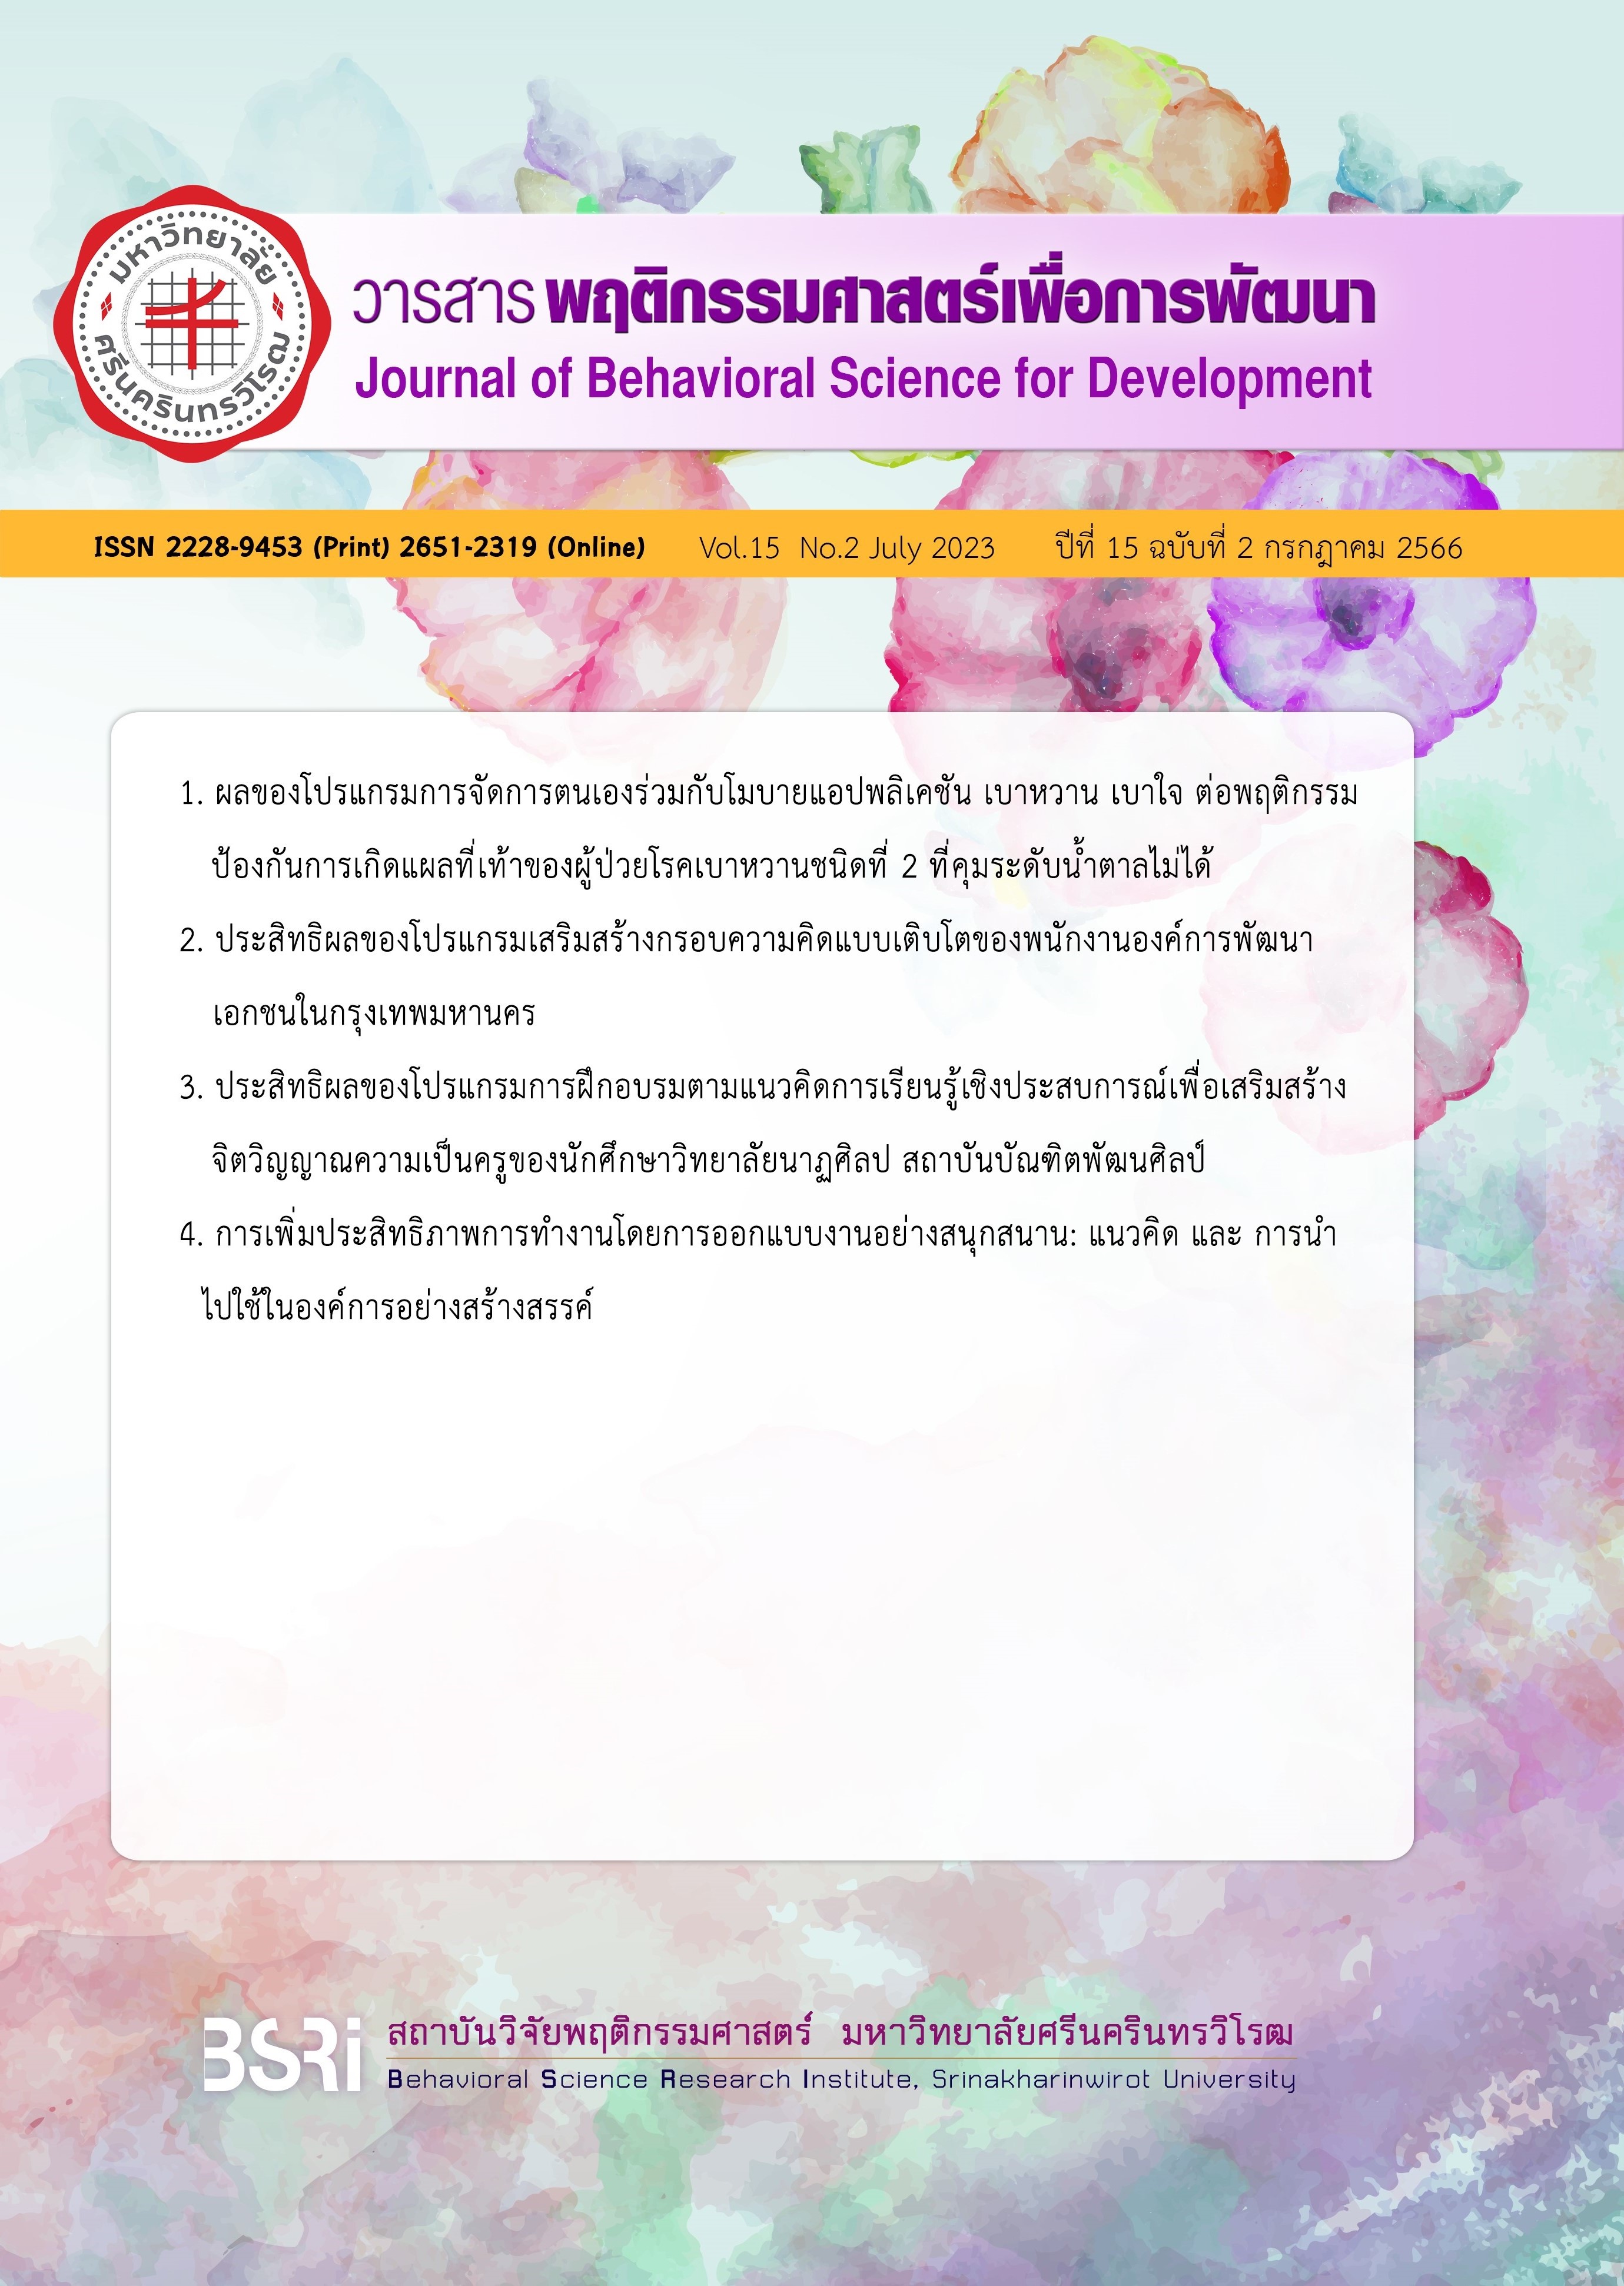 					View Vol. 15 No. 2 (2023): Vol. 15 No. 2 (2023): Journal of Behavioral Science for Development Vol. 15 Issue 2 July 2023
				